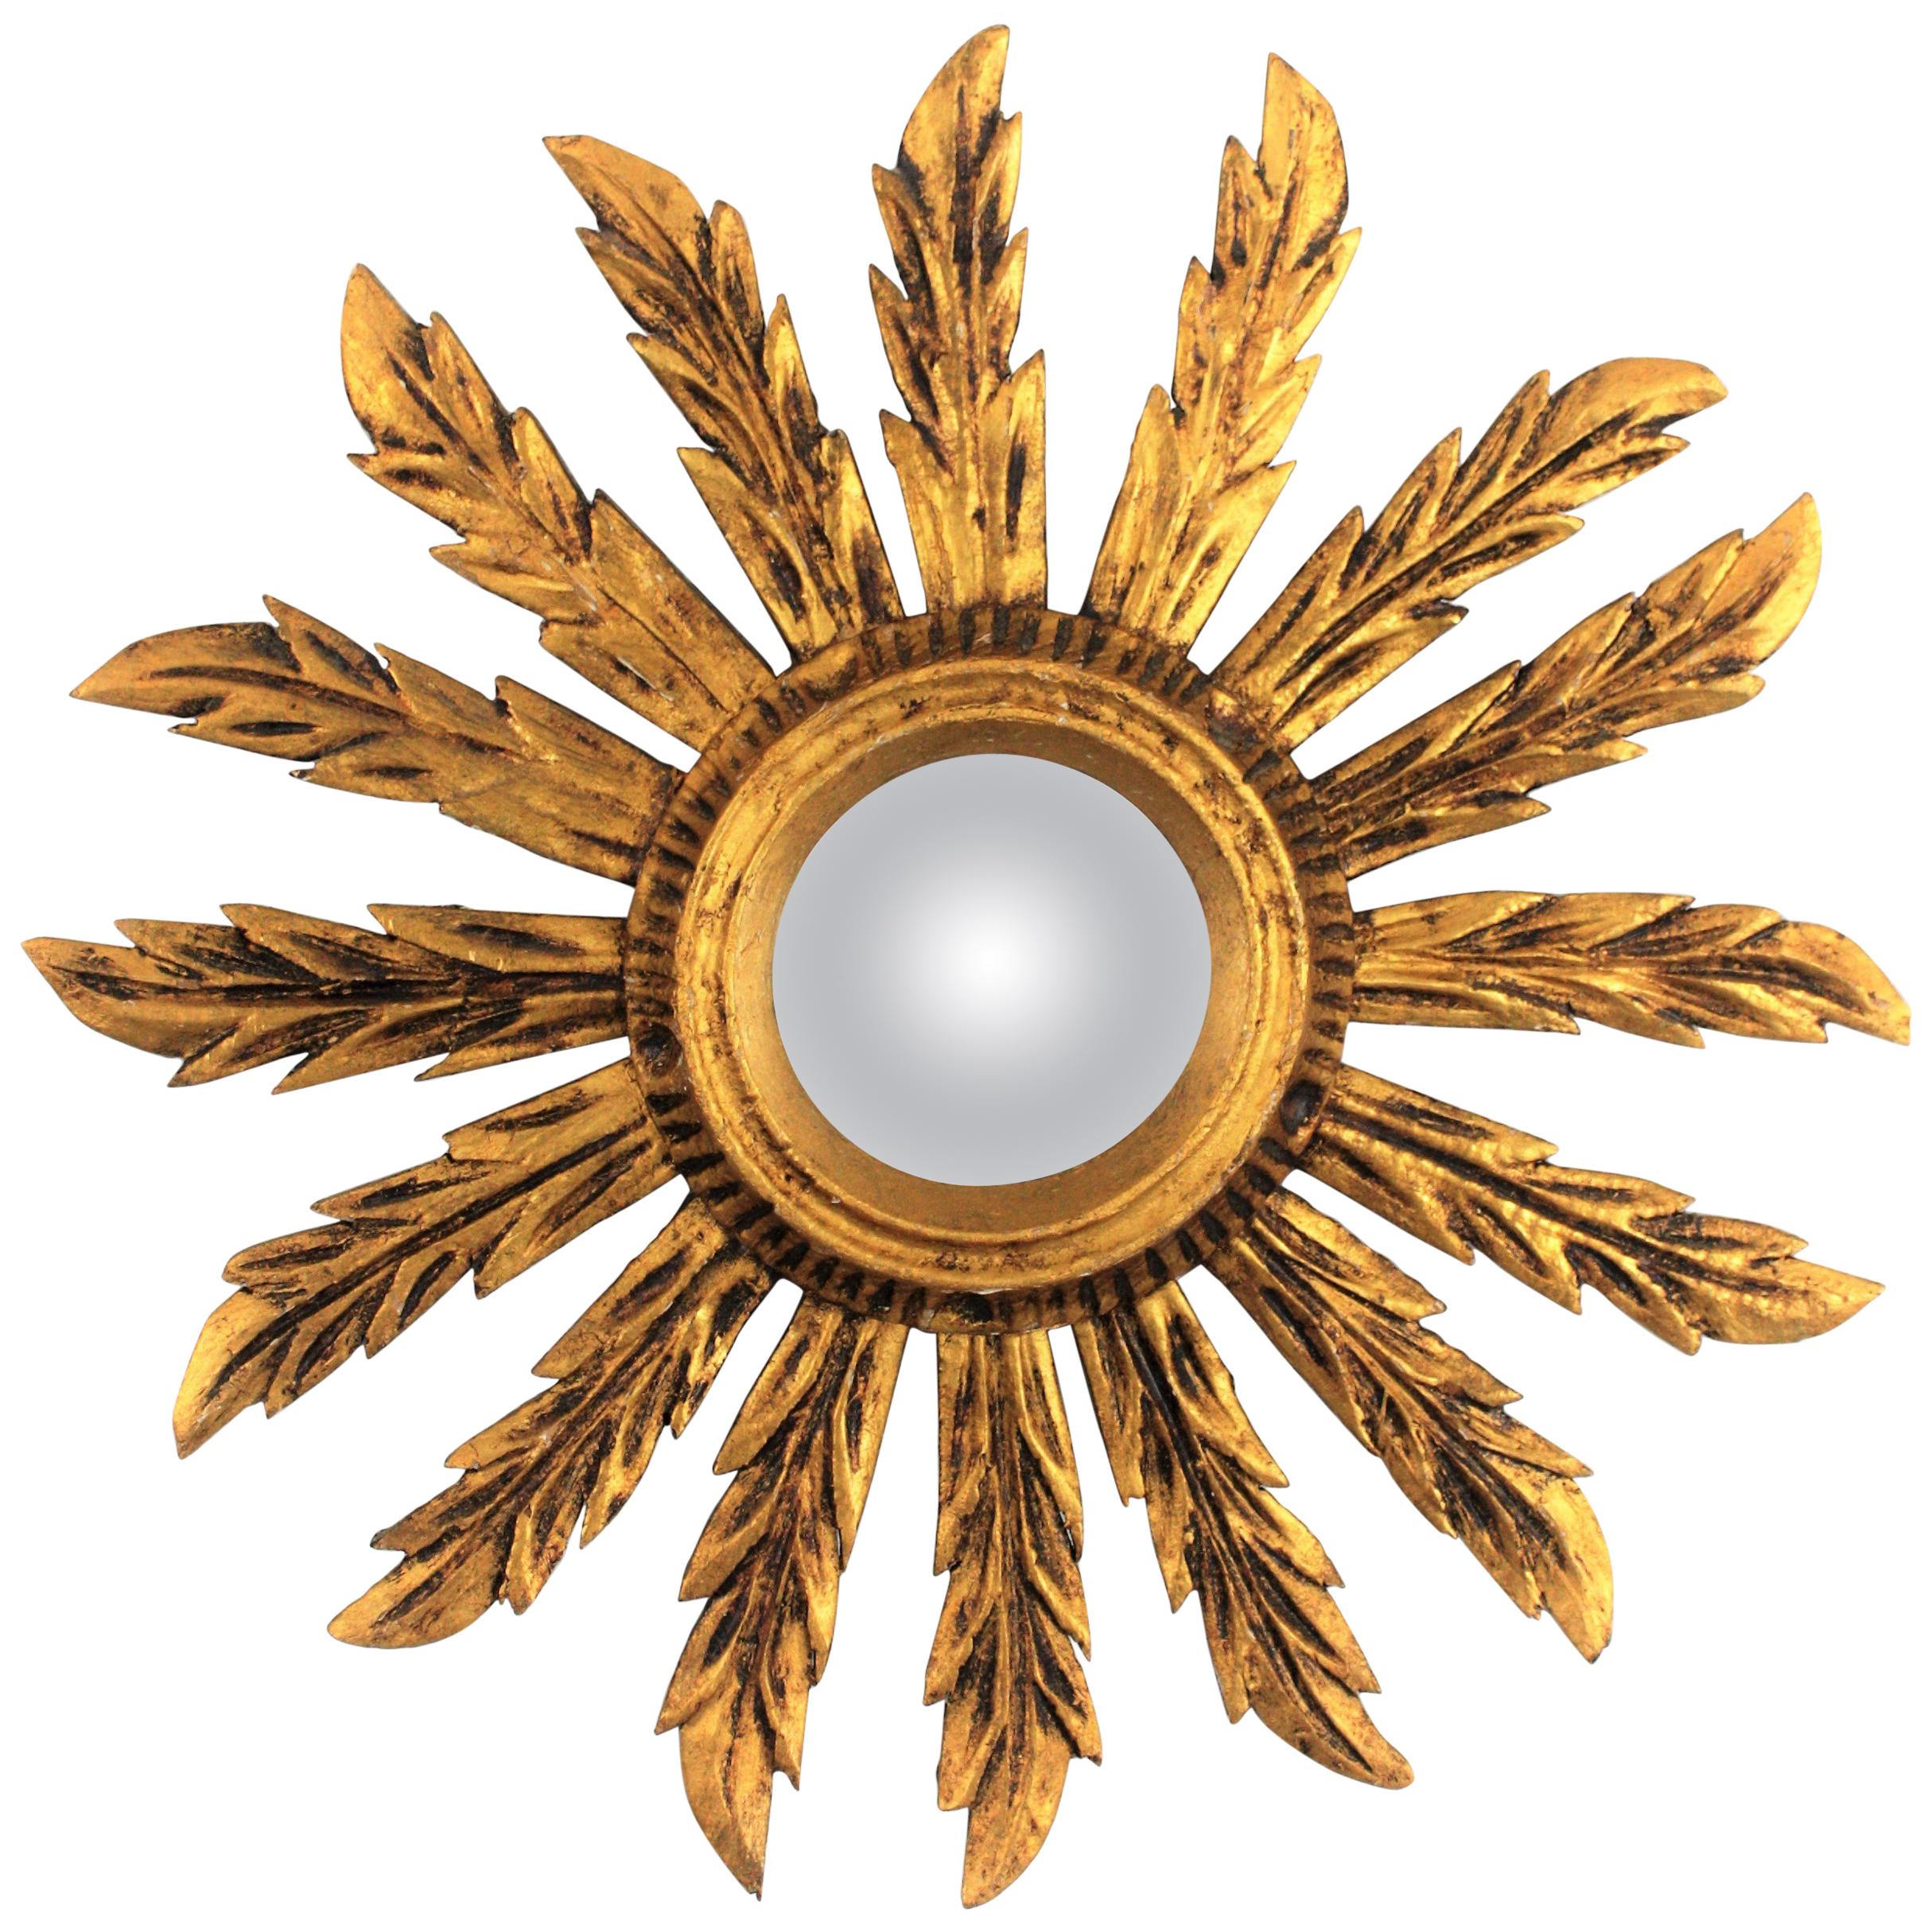 Spanish 1920s Baroque style carved giltwood sunburst convex mirror
Beautiful unusual small sized Baroque style giltwood sunburst mirror with convex glass.
Carved wood covered with gesso and gold leaf finish.
The frame has a lovely aged